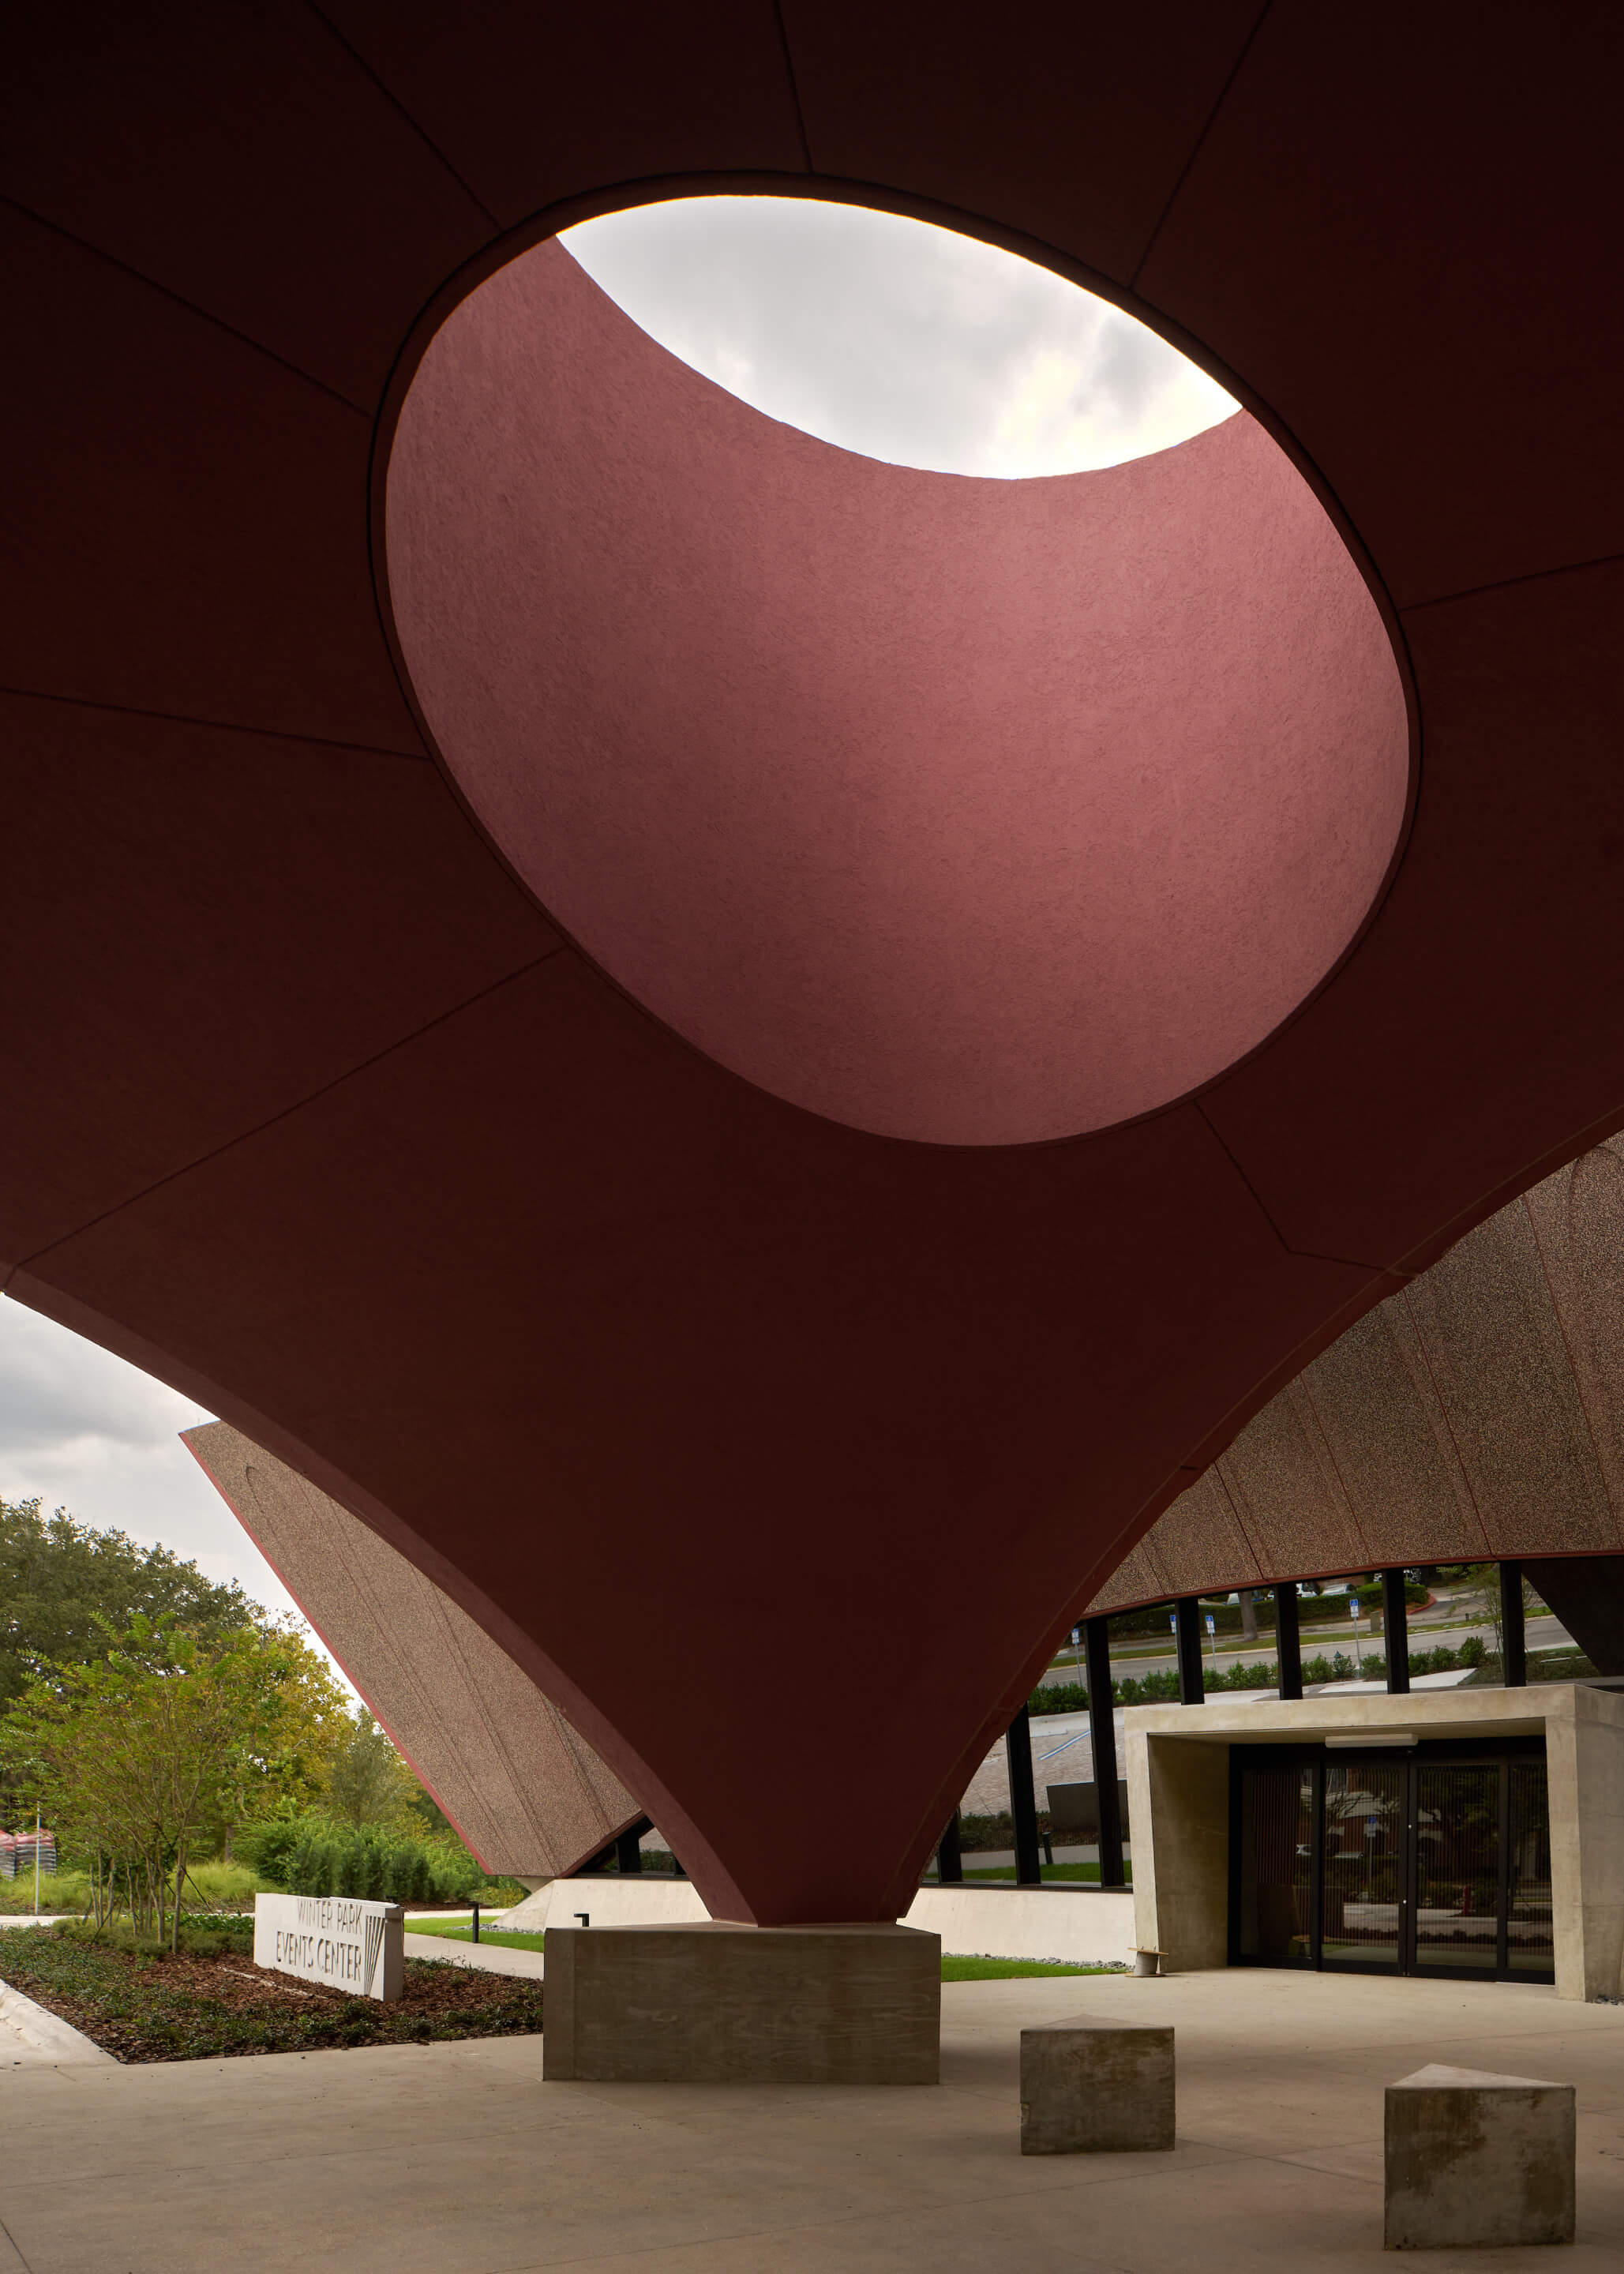 an entrance pavilion to an events center with a large oculus 